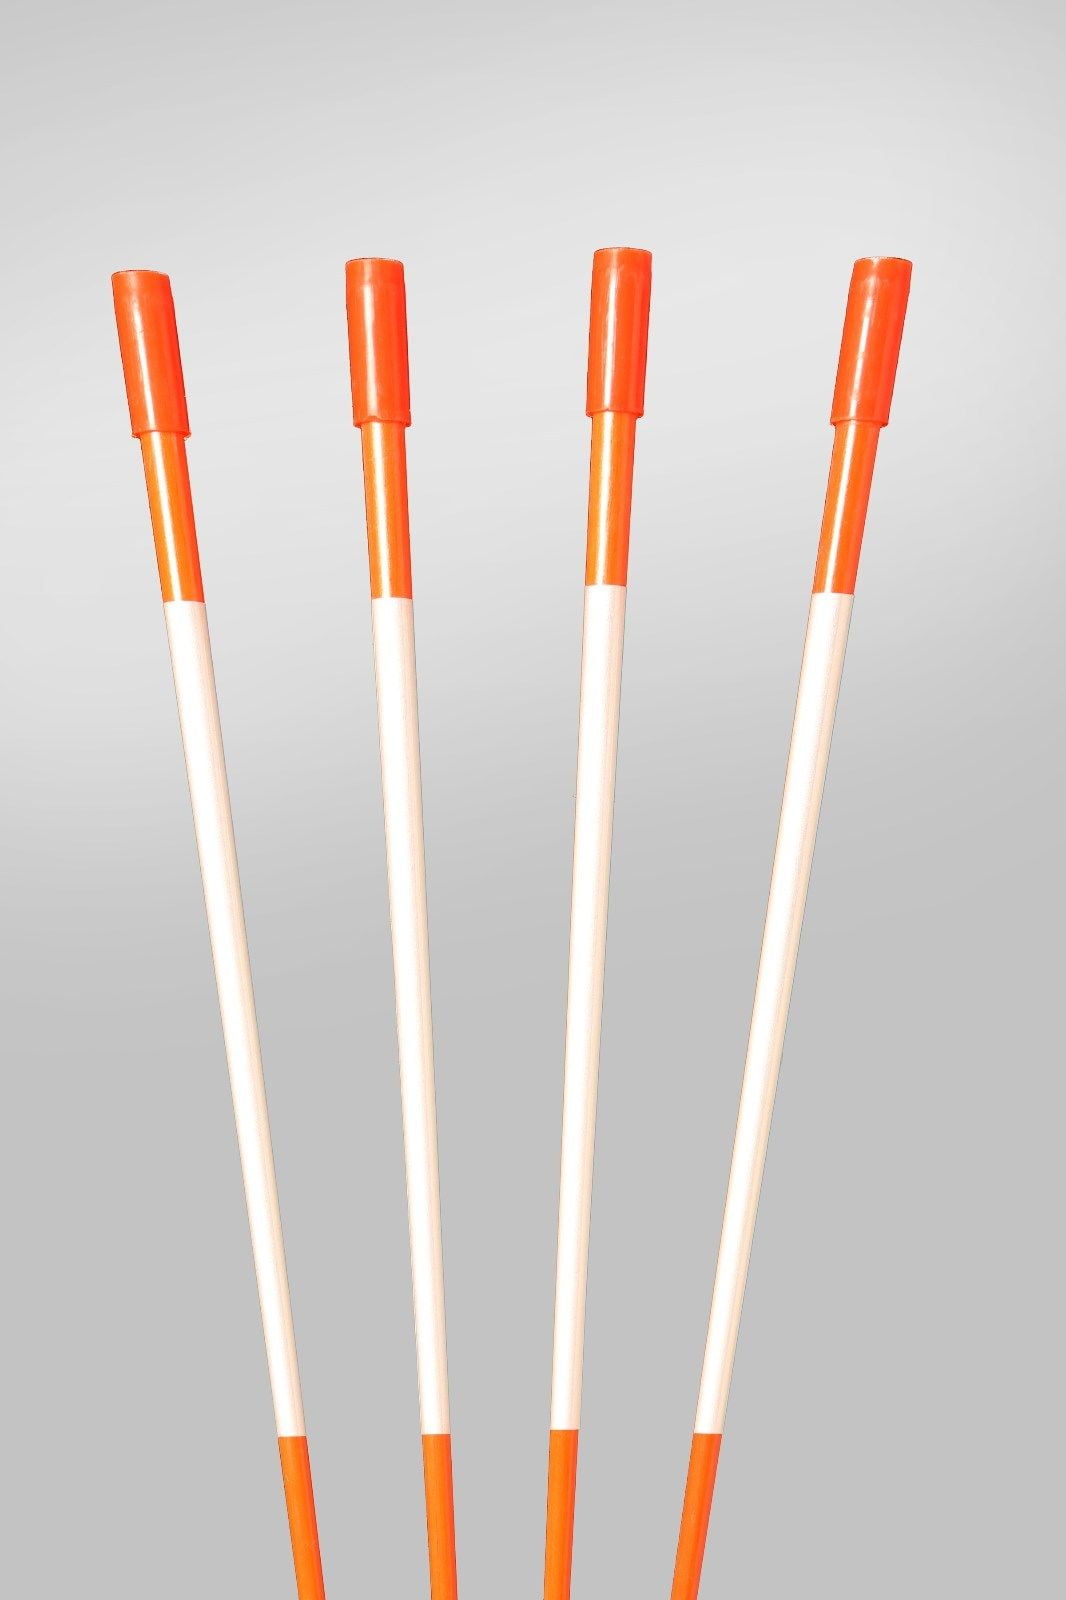 Pack of 100 Snow Poles 48 inches 5/16 inch Heavy Duty Orange with Reflectors 